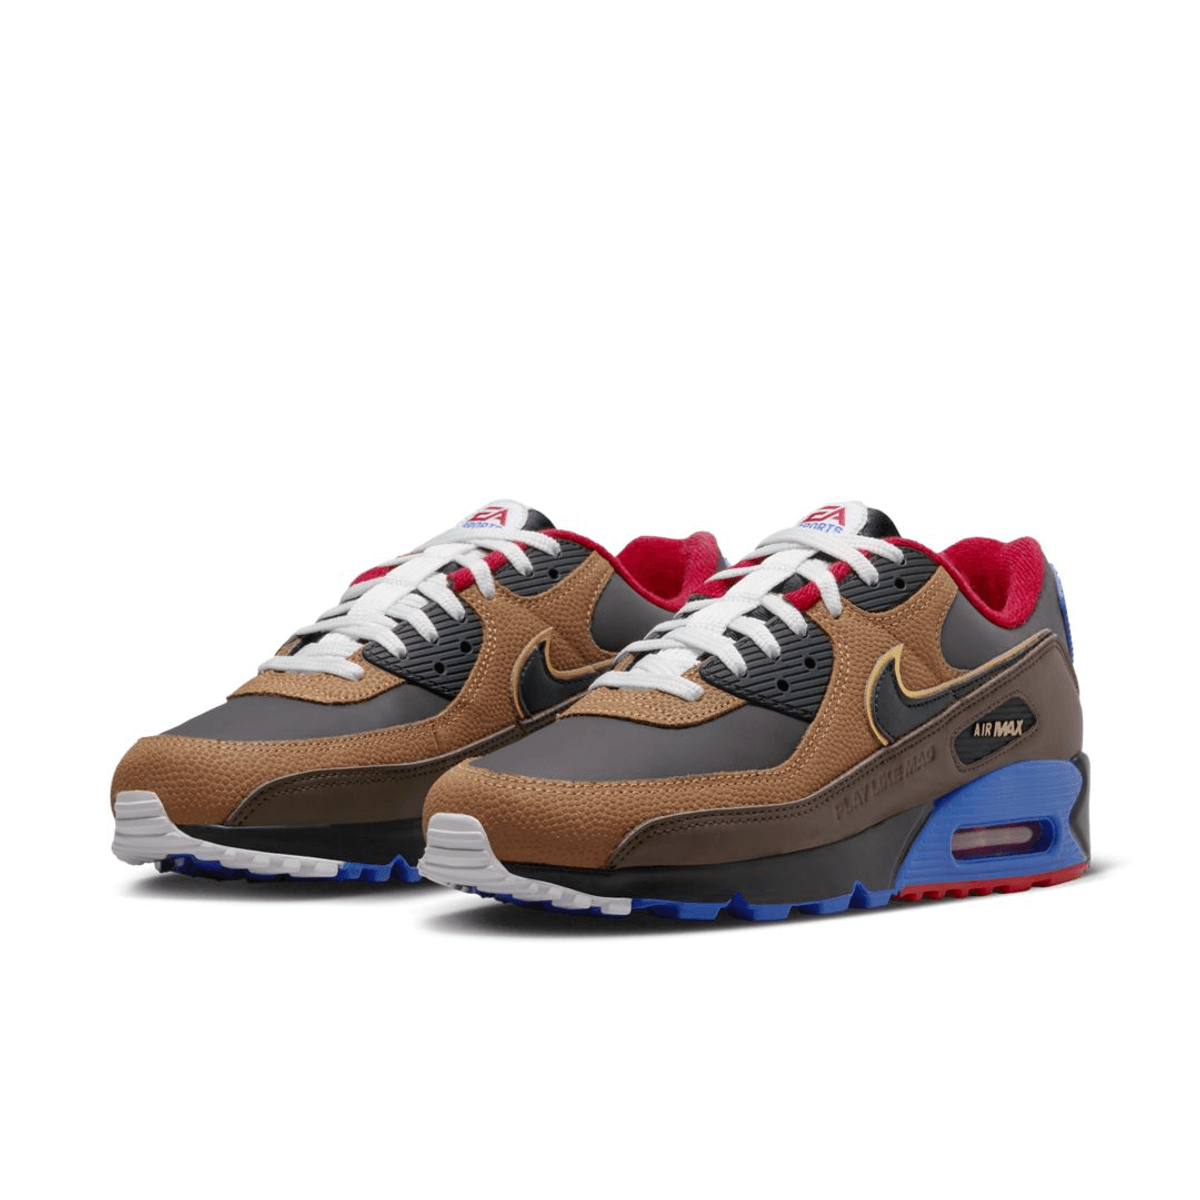 "Play Like Mad" With The Nike x EA Sports Air Max 90